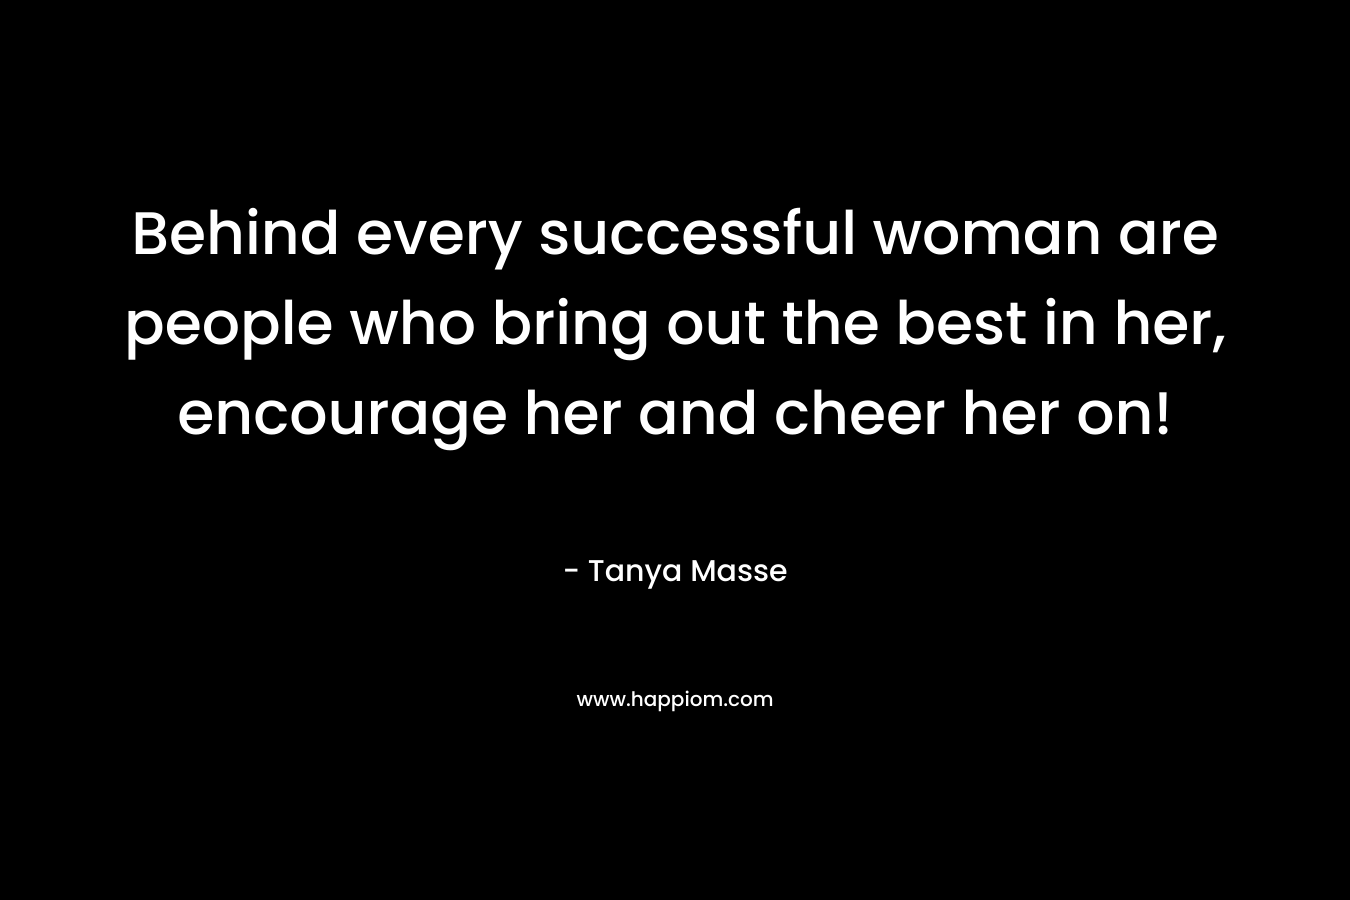 Behind every successful woman are people who bring out the best in her, encourage her and cheer her on!